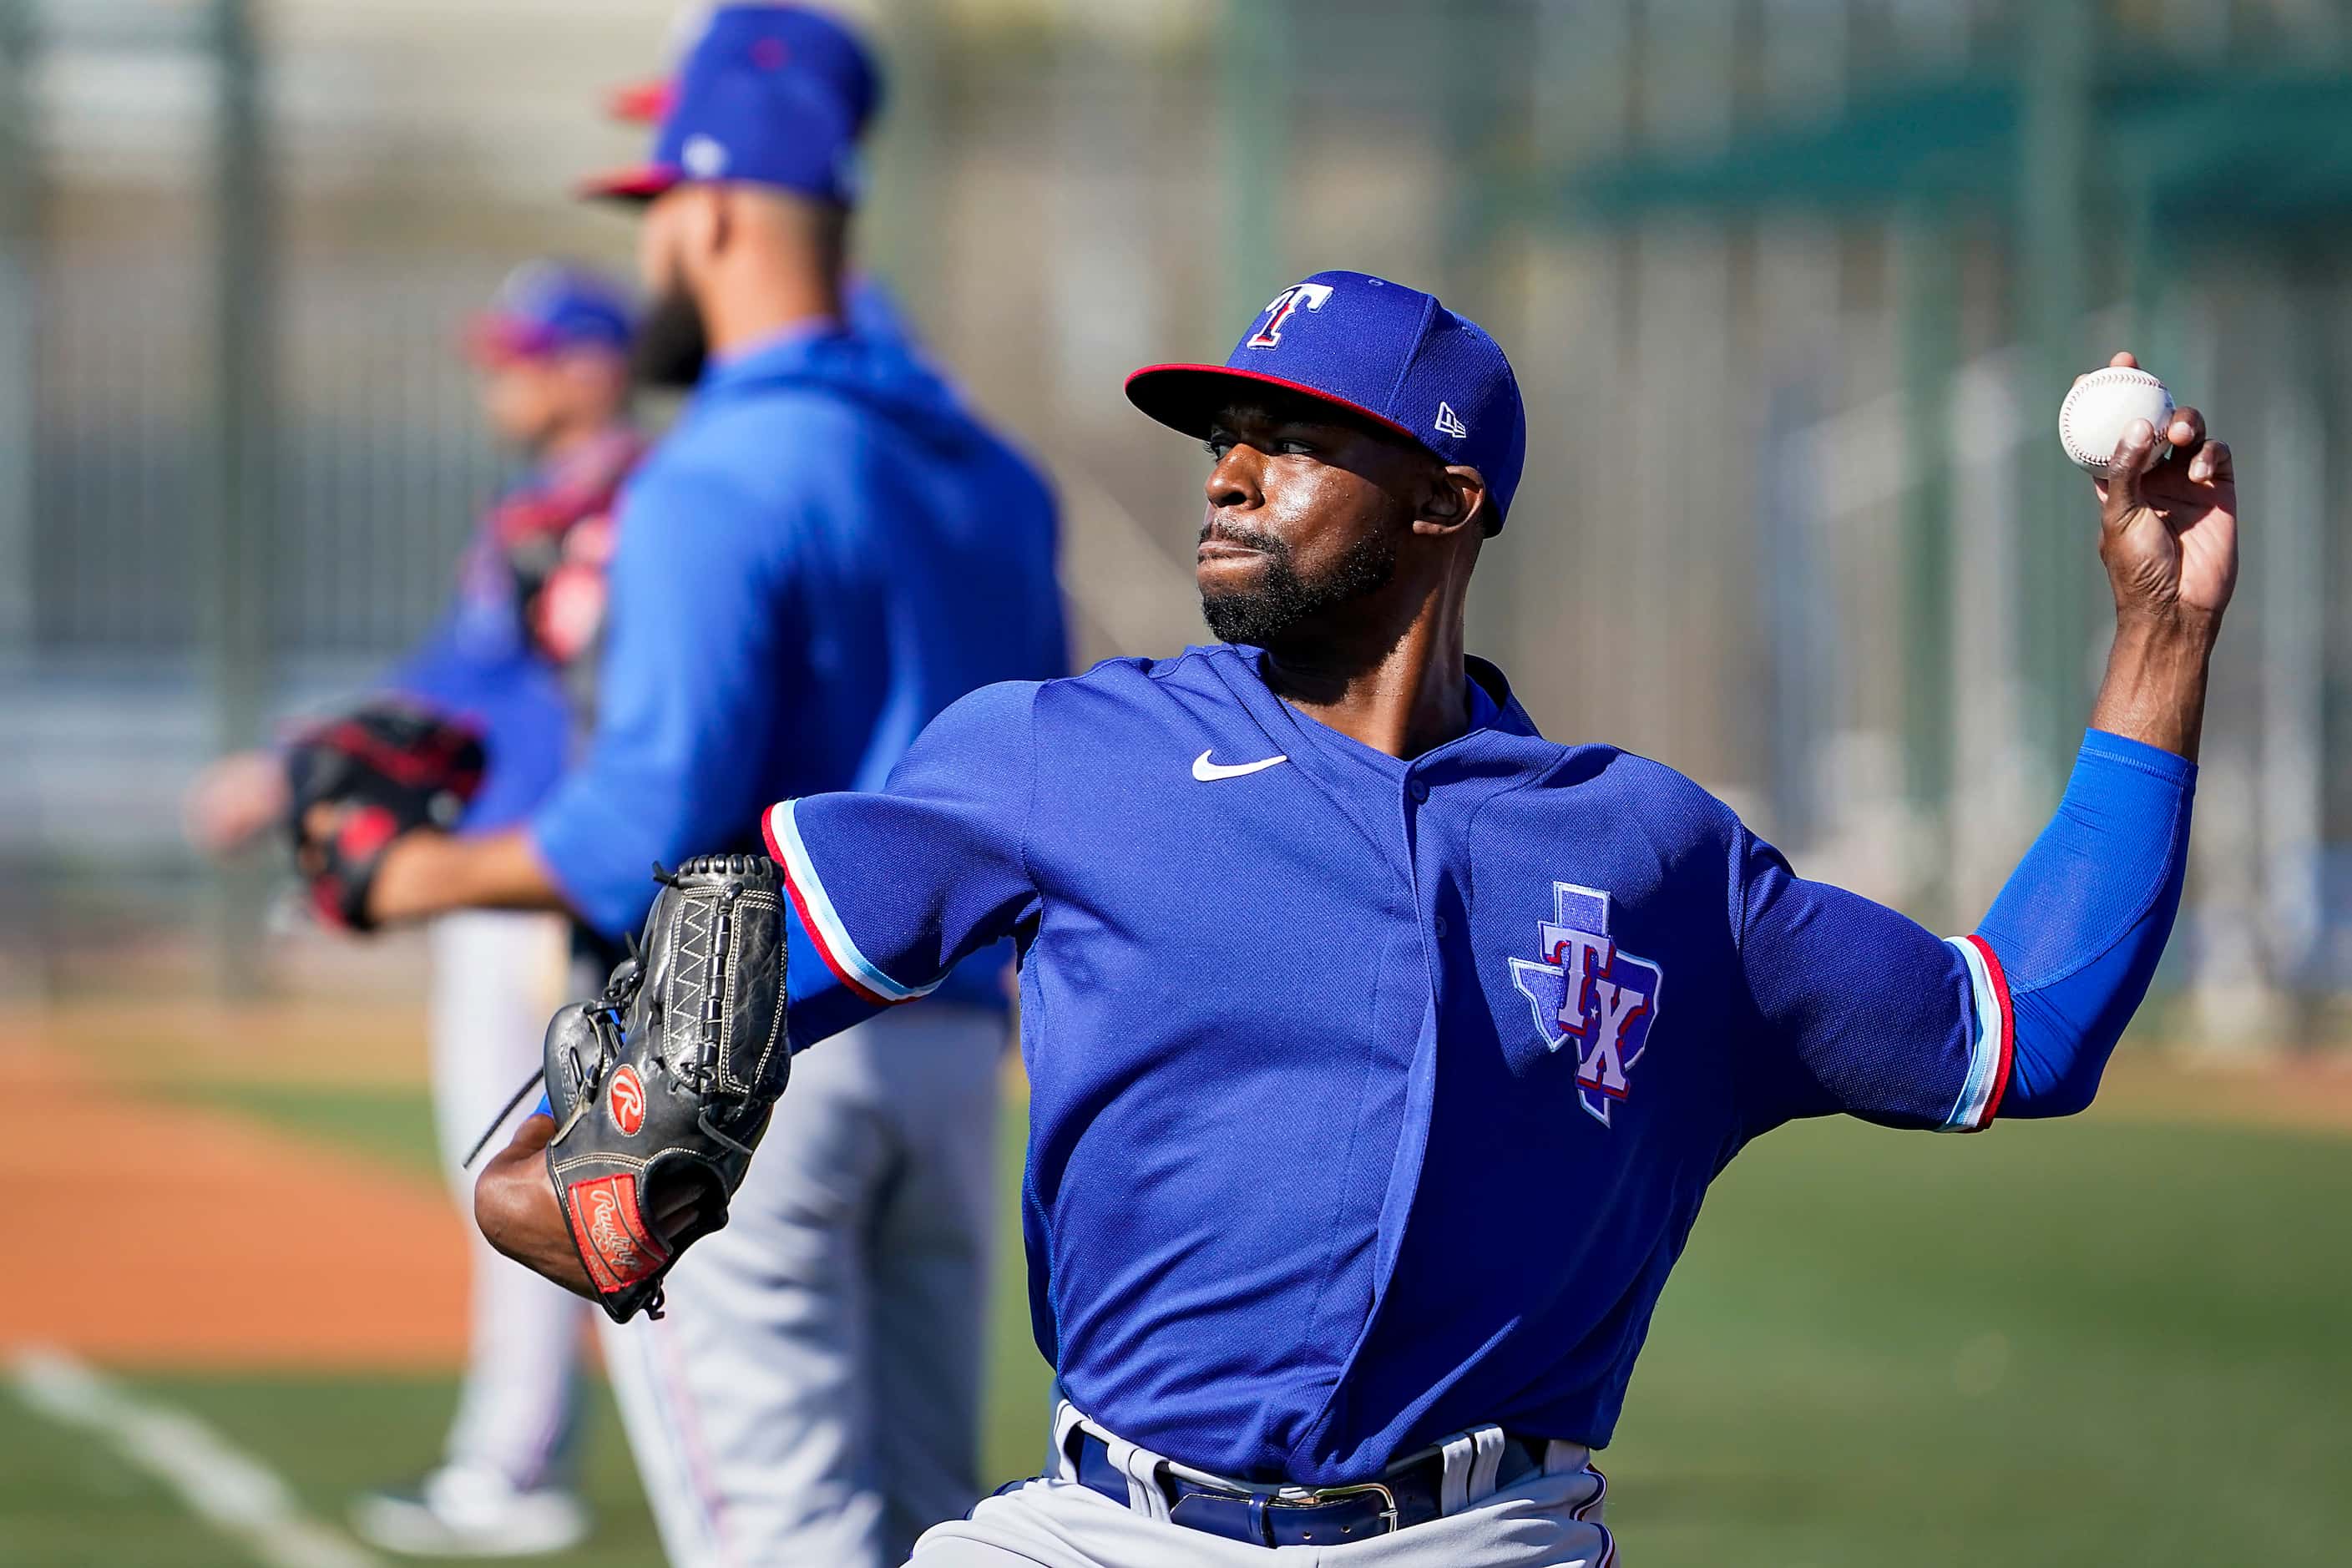 Texas Rangers pitcher James Jones plays catch during a spring training workout at the team's...